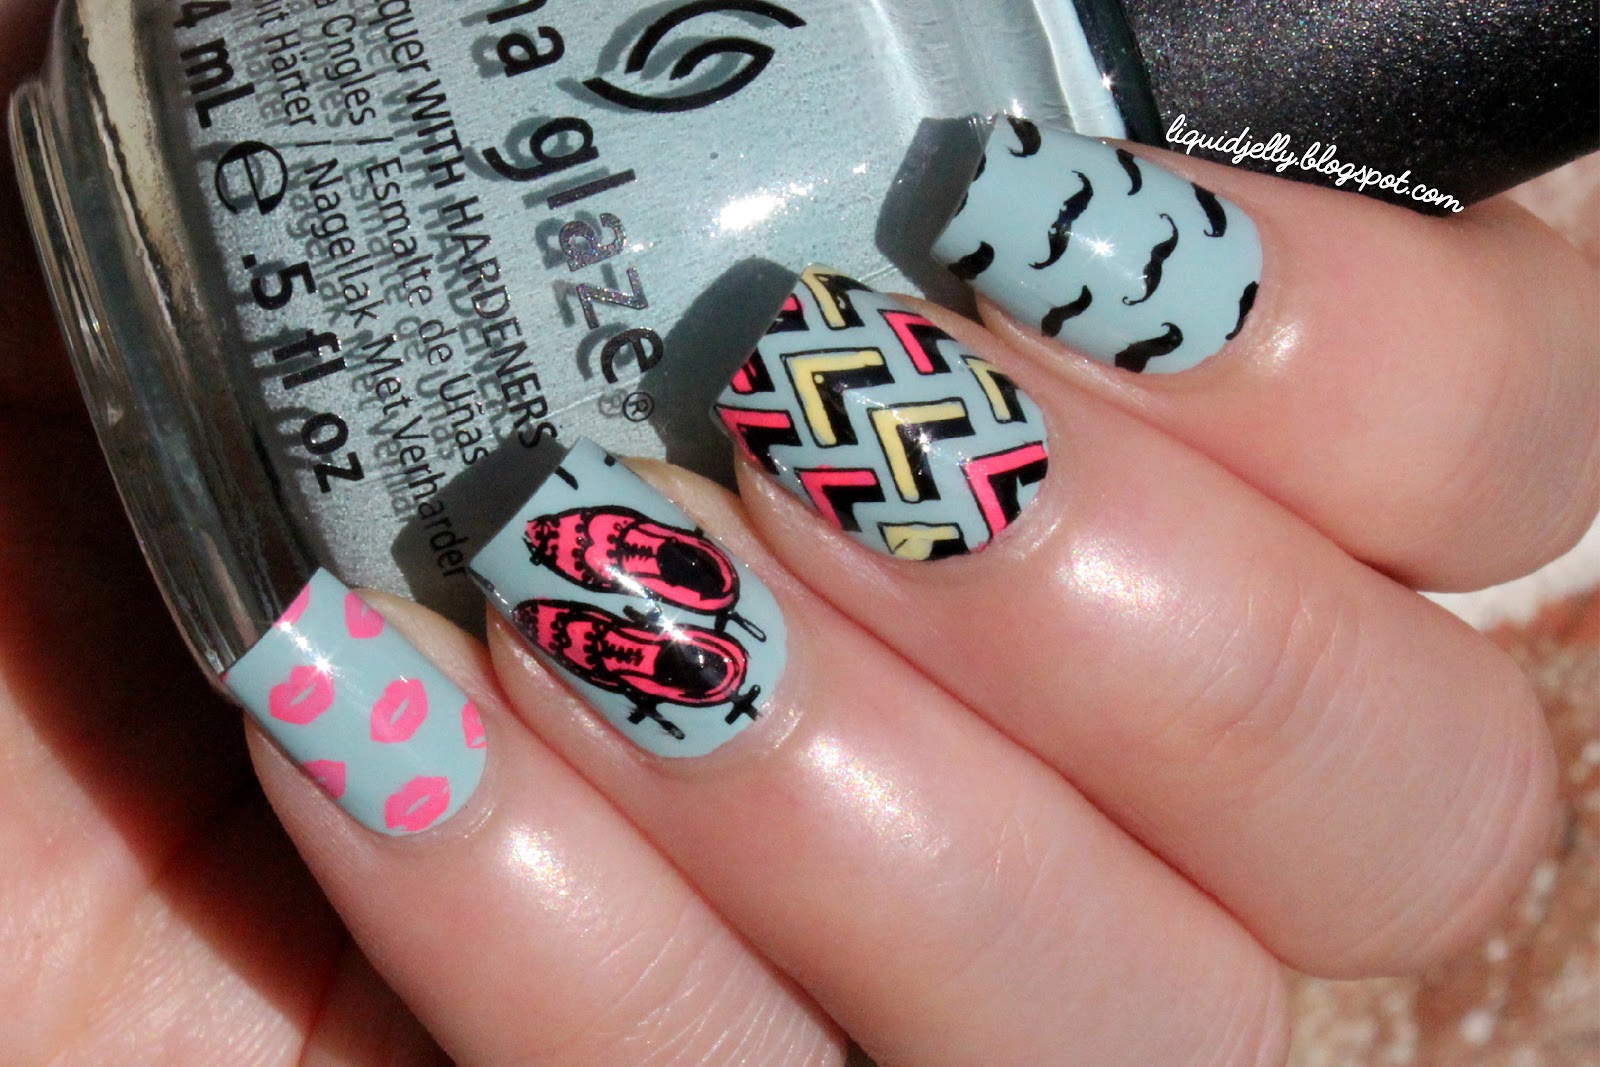 2. "Easy Hipster Nail Art Tutorial" - wide 3